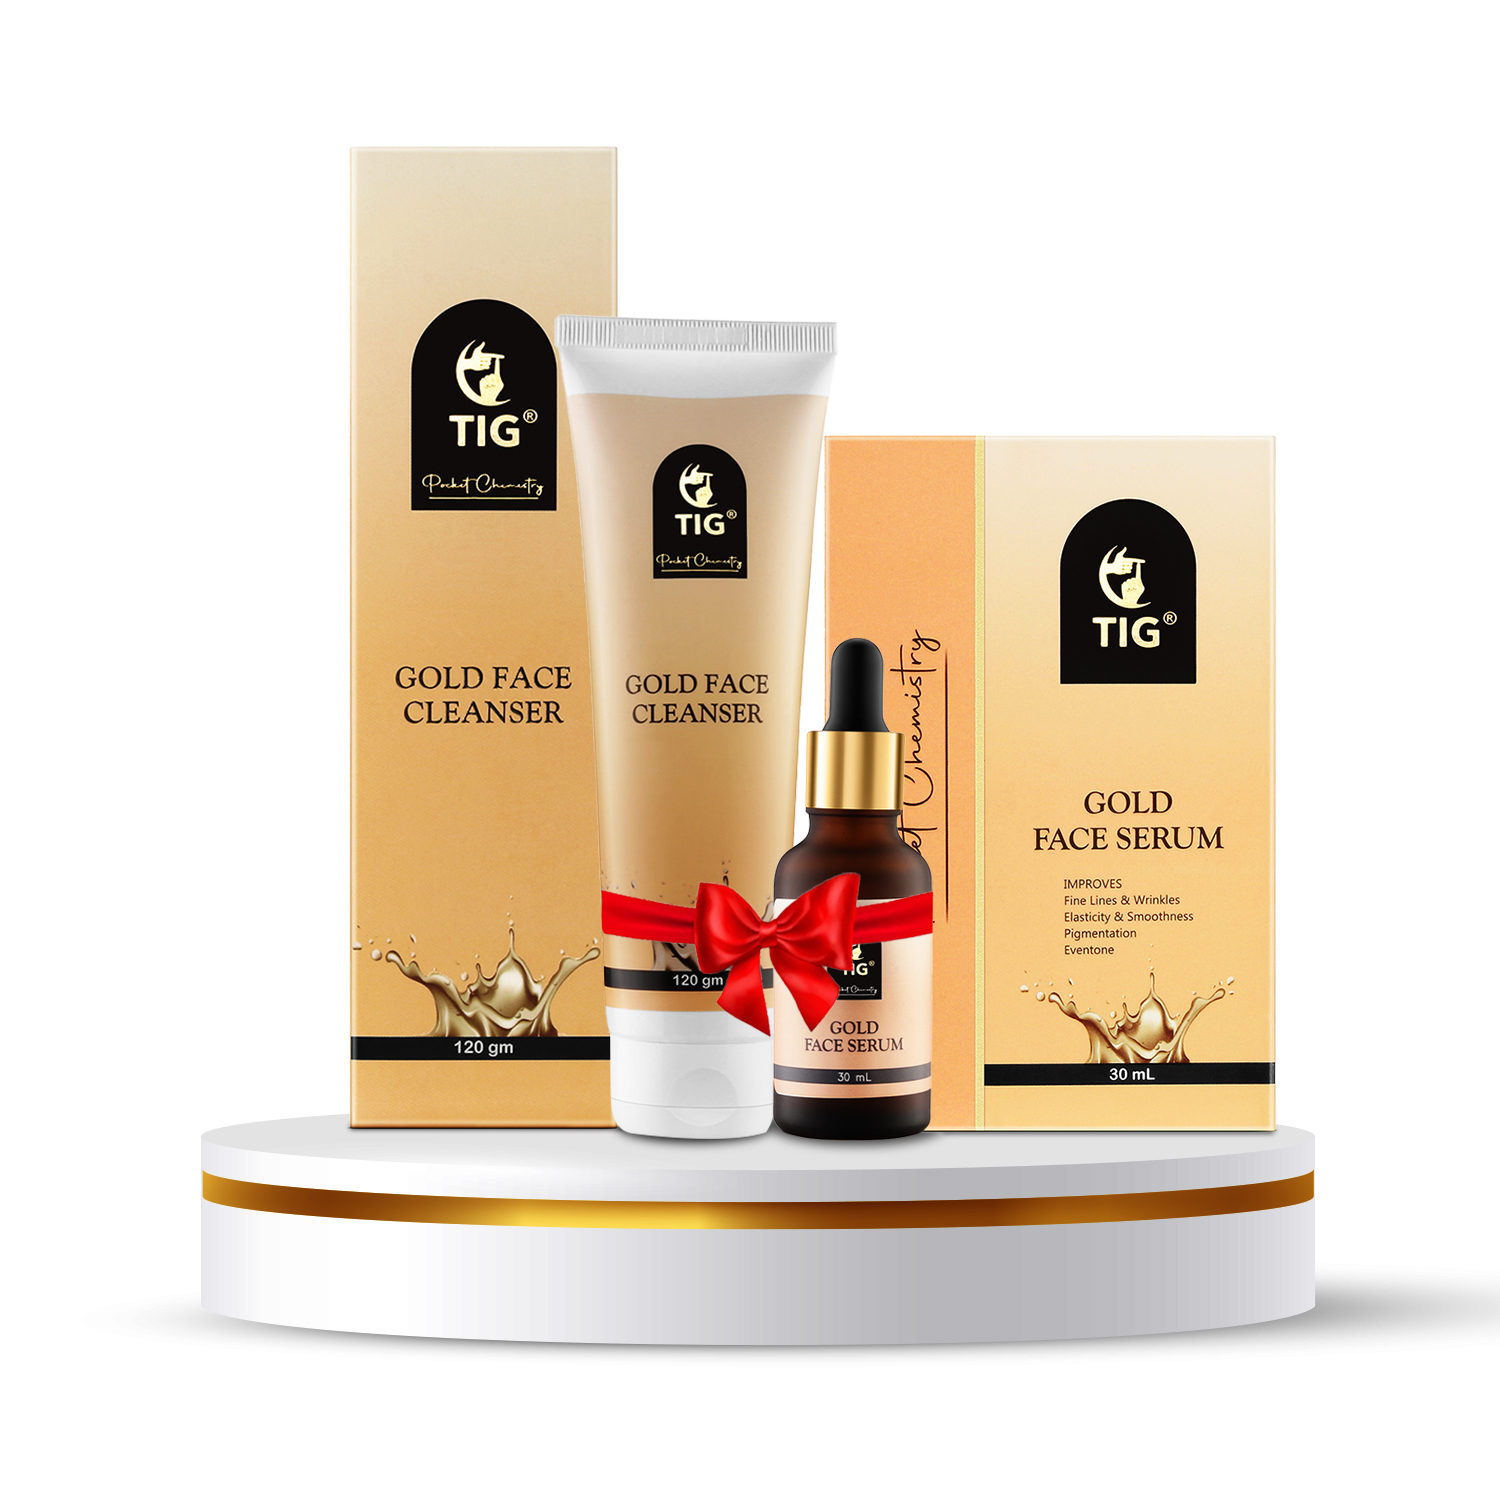 COMBO PACK GOLD FACE SERUM AND GOLD FACE CLEANSER 